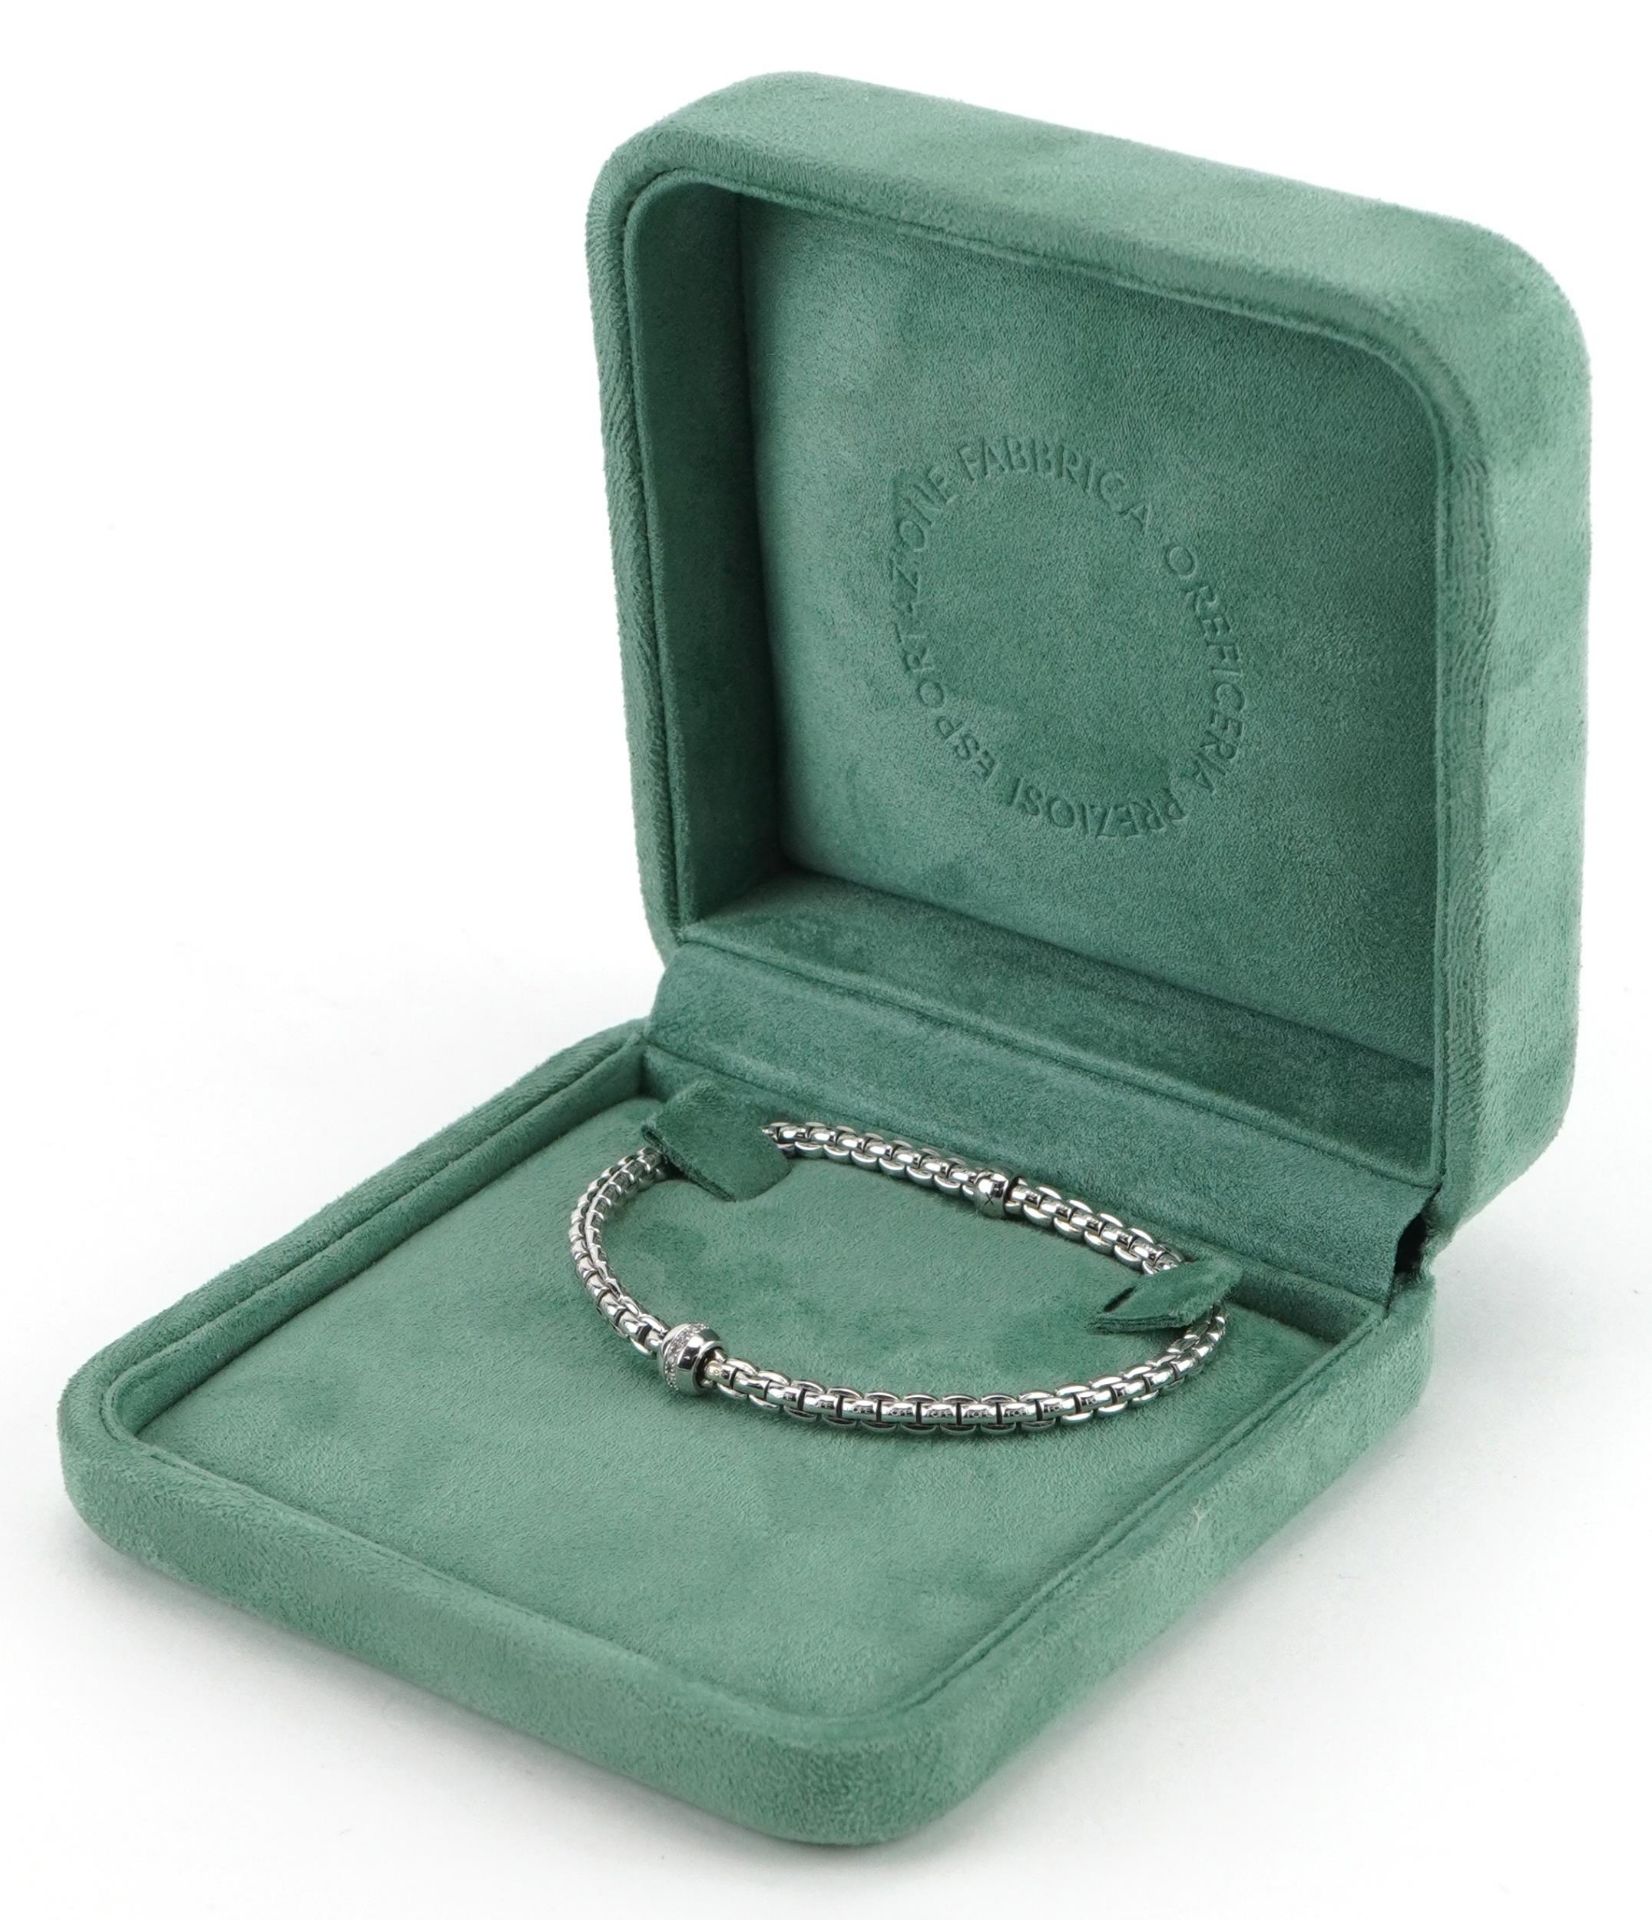 Fope, Italian 18ct white gold and diamond Flex'It bracelet with box, 16cm in length, 9.6g - Image 4 of 5